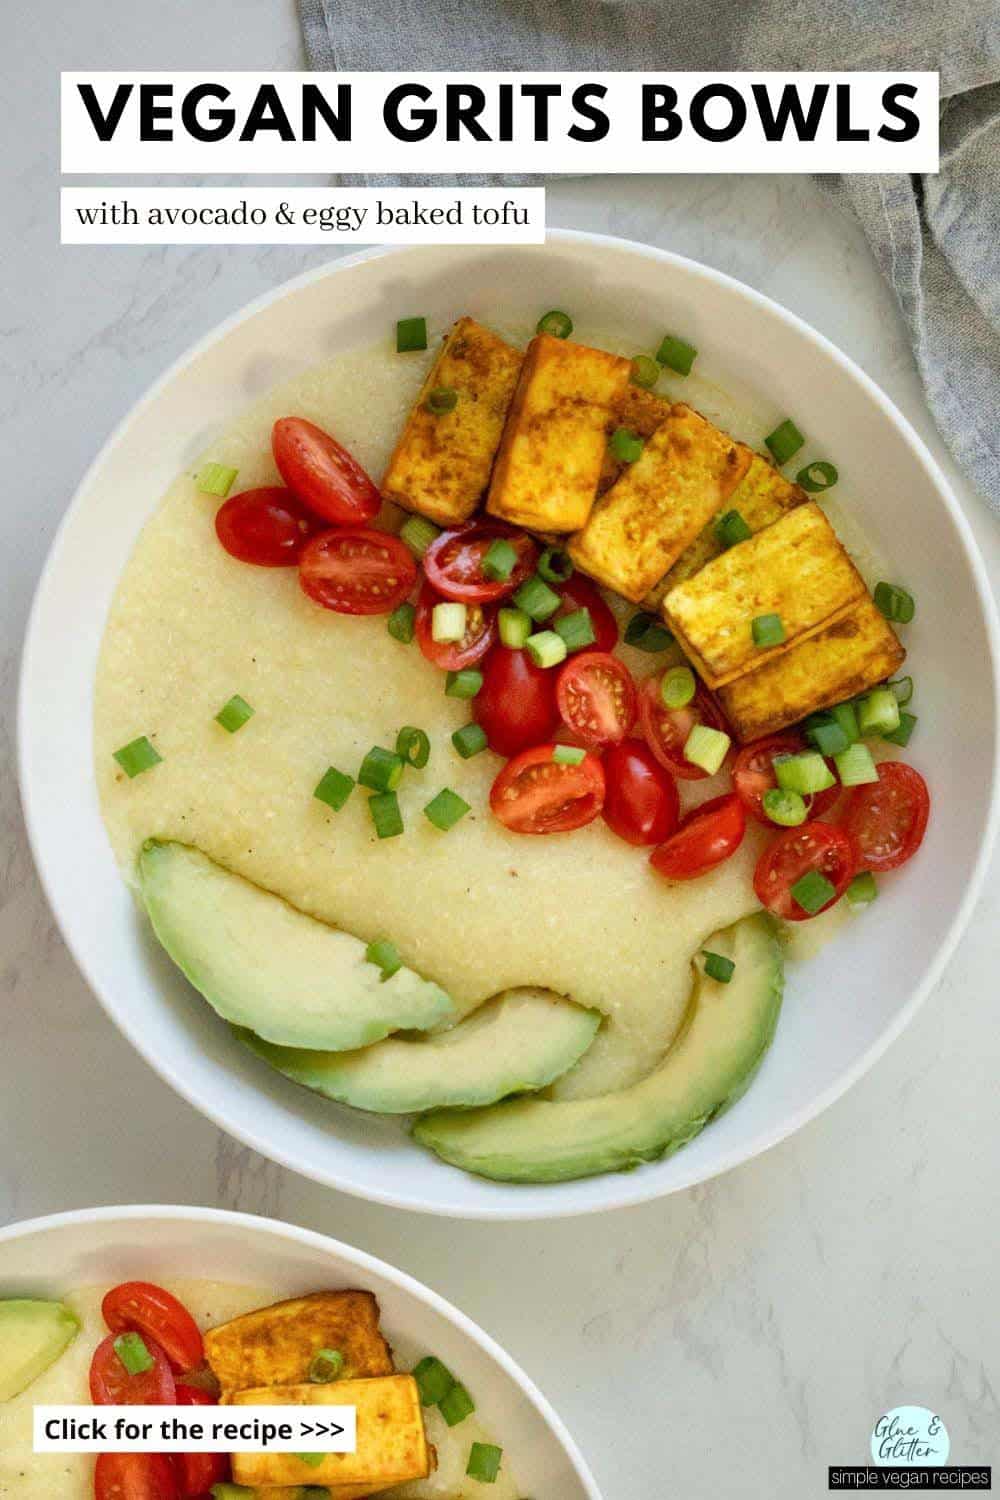 vegan grits bowls with tofu, avocado, tomato, and green onions in bowls on a white table, text overlay